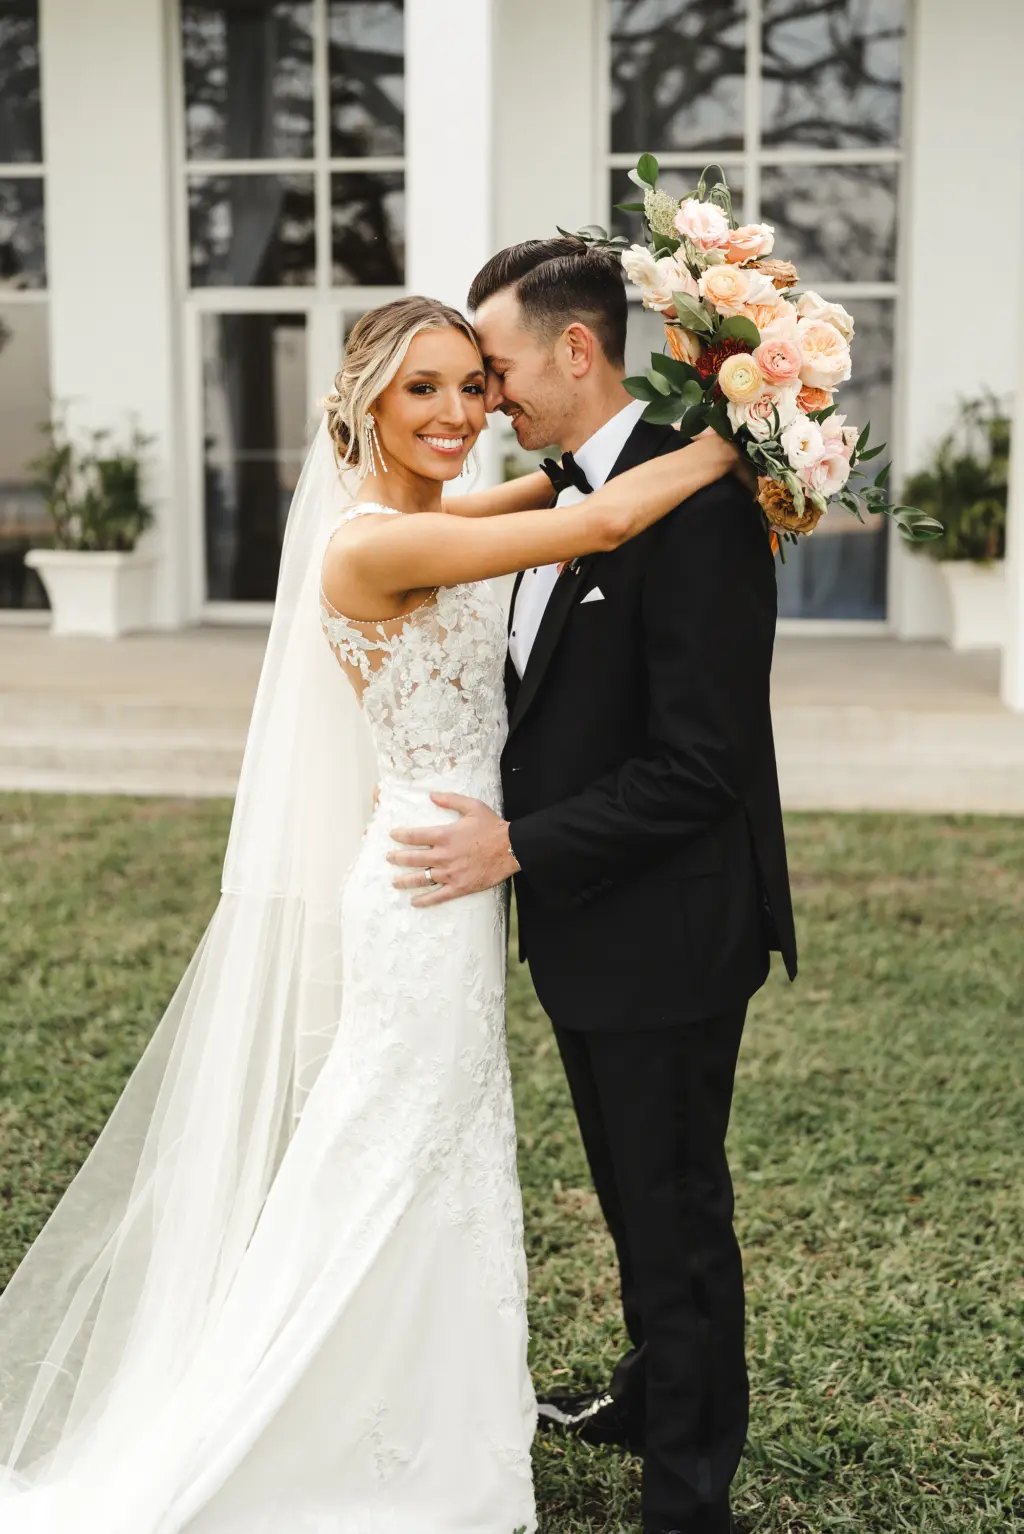 Bride and Groom Just Married Wedding Portrait | Tampa Bay Photographer Videographer J&S Media | Hair and Makeup Artist Femme Akoi Beauty Studio